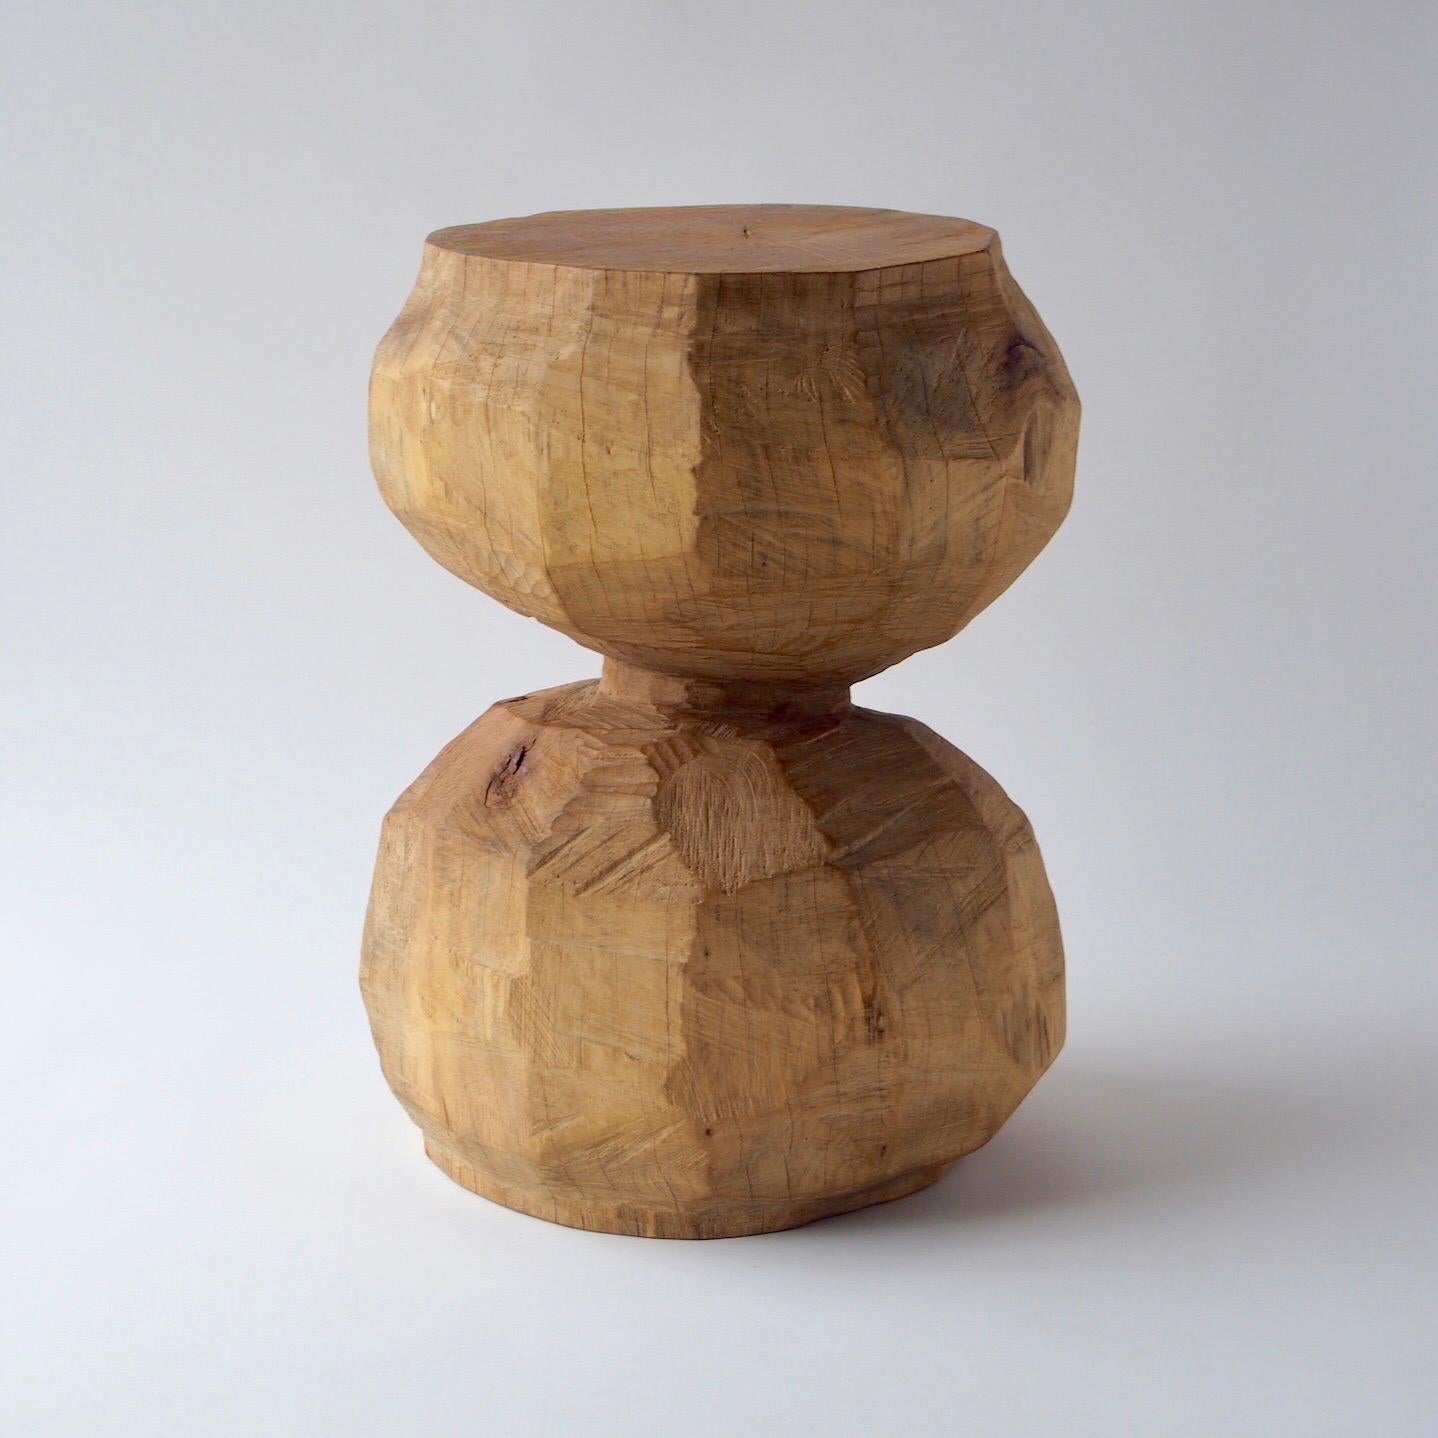 Name: Under the ground
Sculptural stool by Zogei carved furniture
Material: Zelkova
This work is carved from log with some kinds of chainsaws.
Most of wood used for Nishimura's works are unable to use anything, these woods are unsuitable